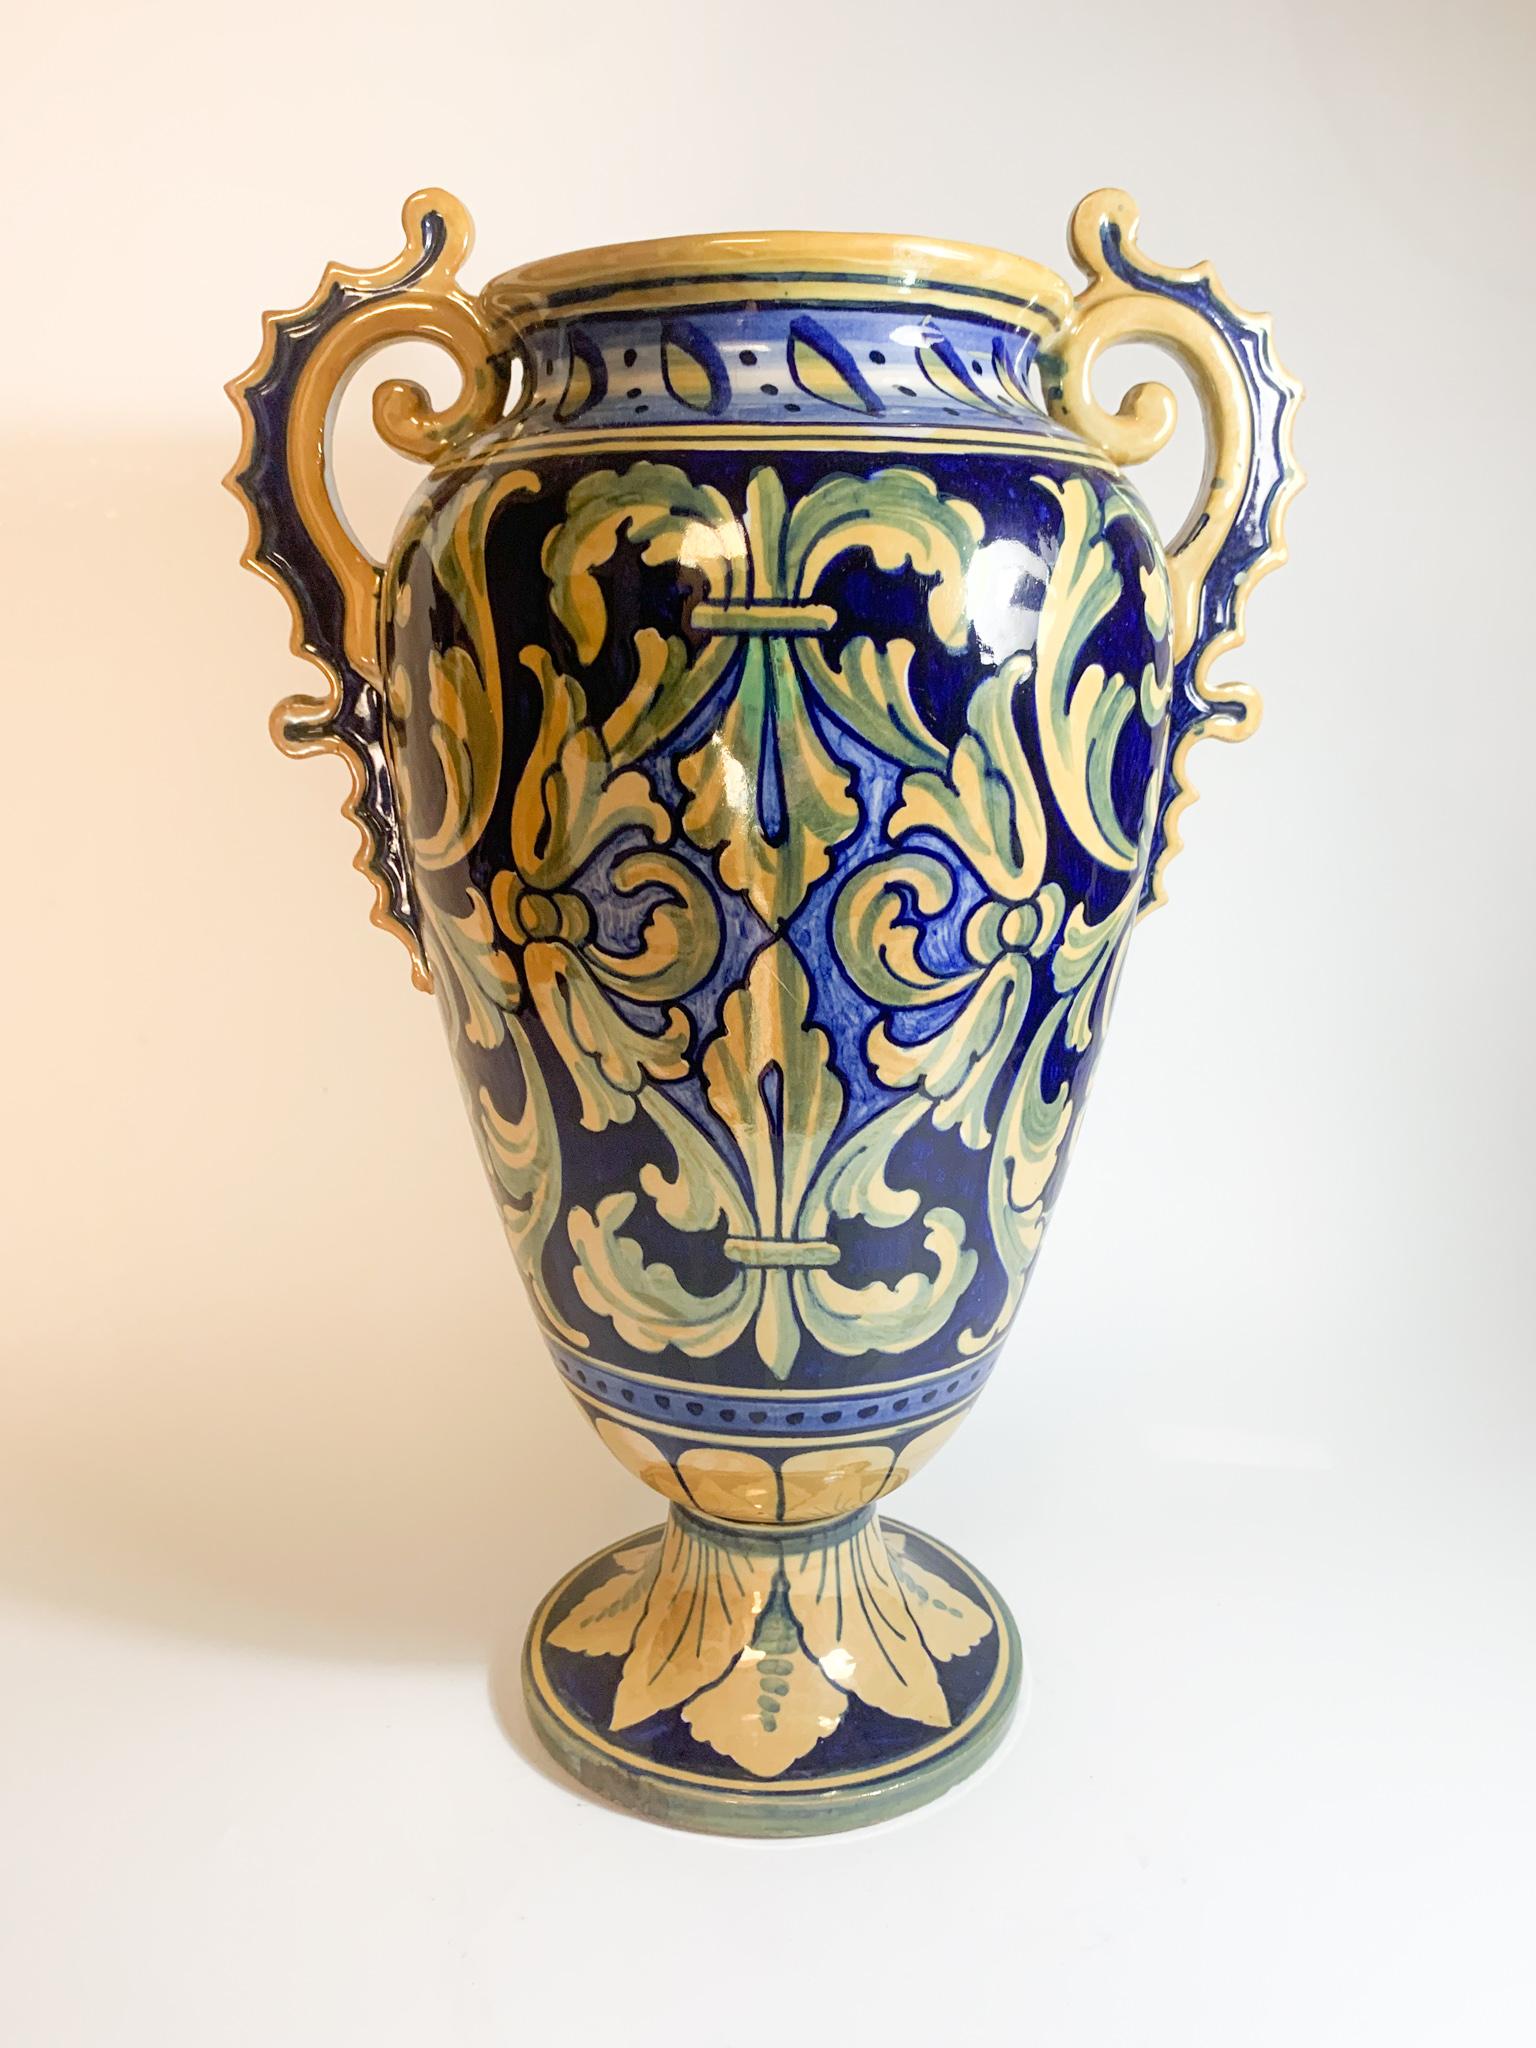 Hand painted blue and iridescent yellow ceramic vase, made by Gualdo Tadino in the 1950s

Ø 23 cm h 33 cm